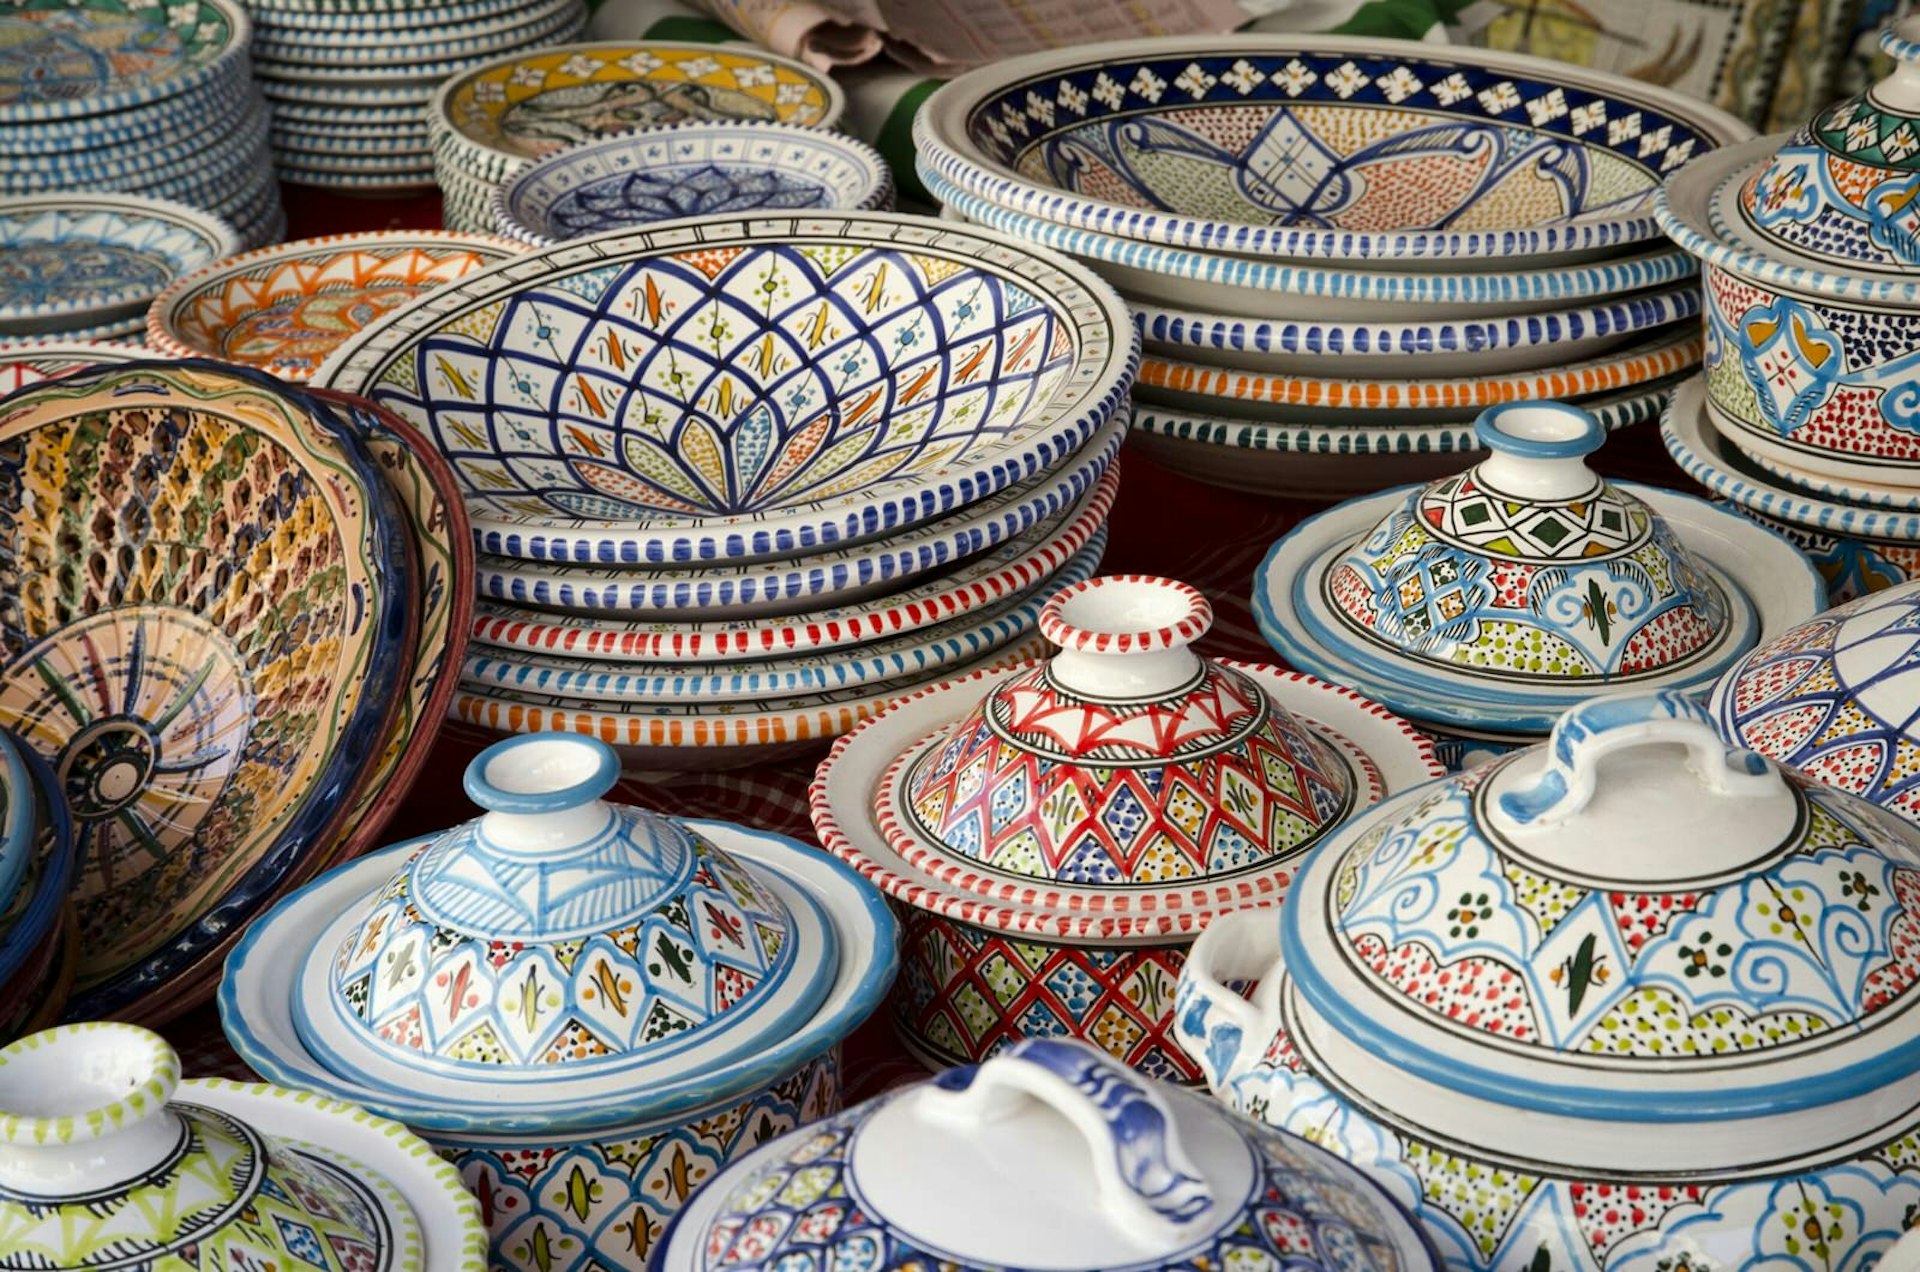 Close-Up Of Decorative Ceramic Bowls For Sale In Market